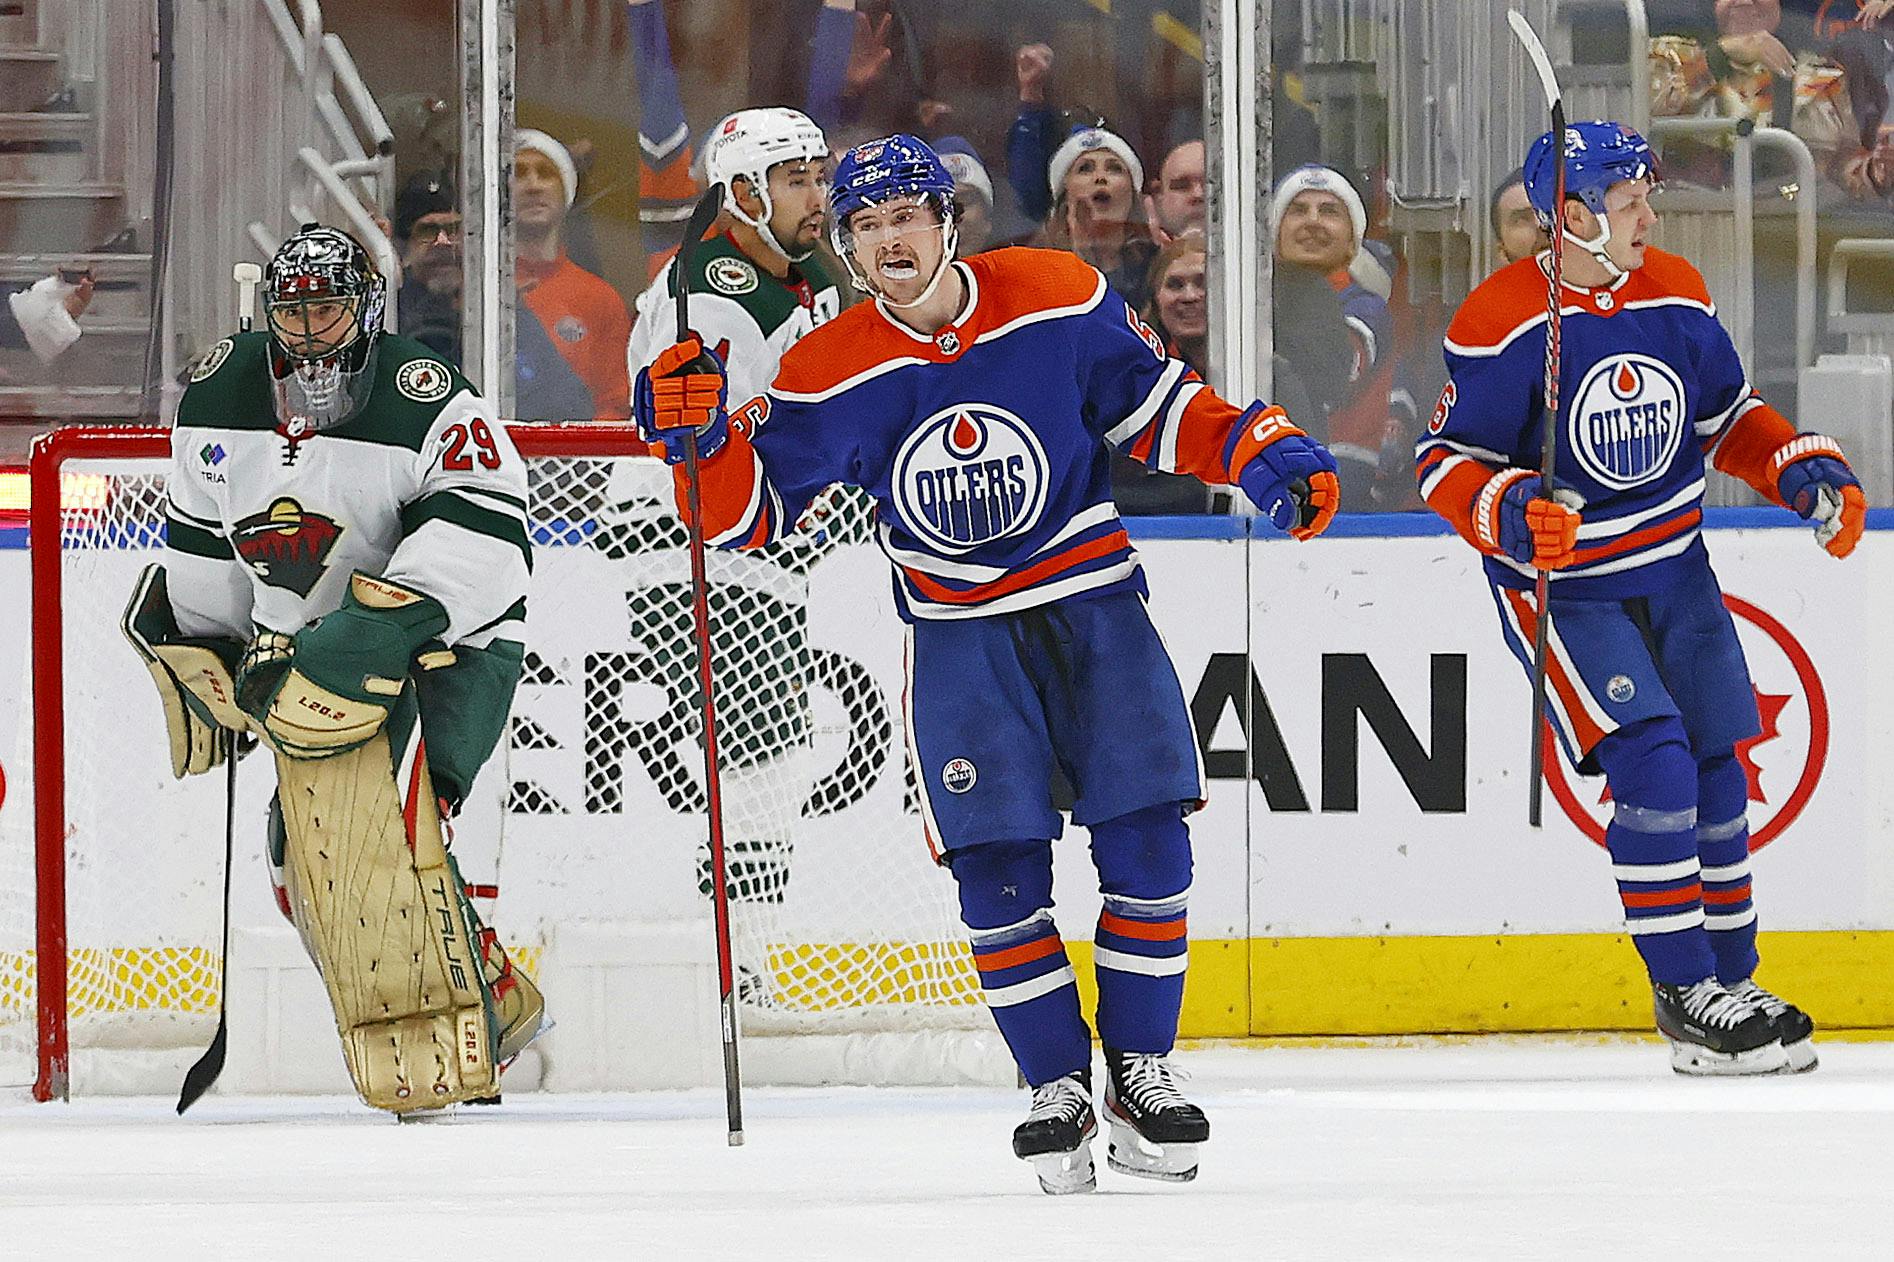 3 Edmonton Oilers Who Could Be Trade Candidates in 2022 Offseason